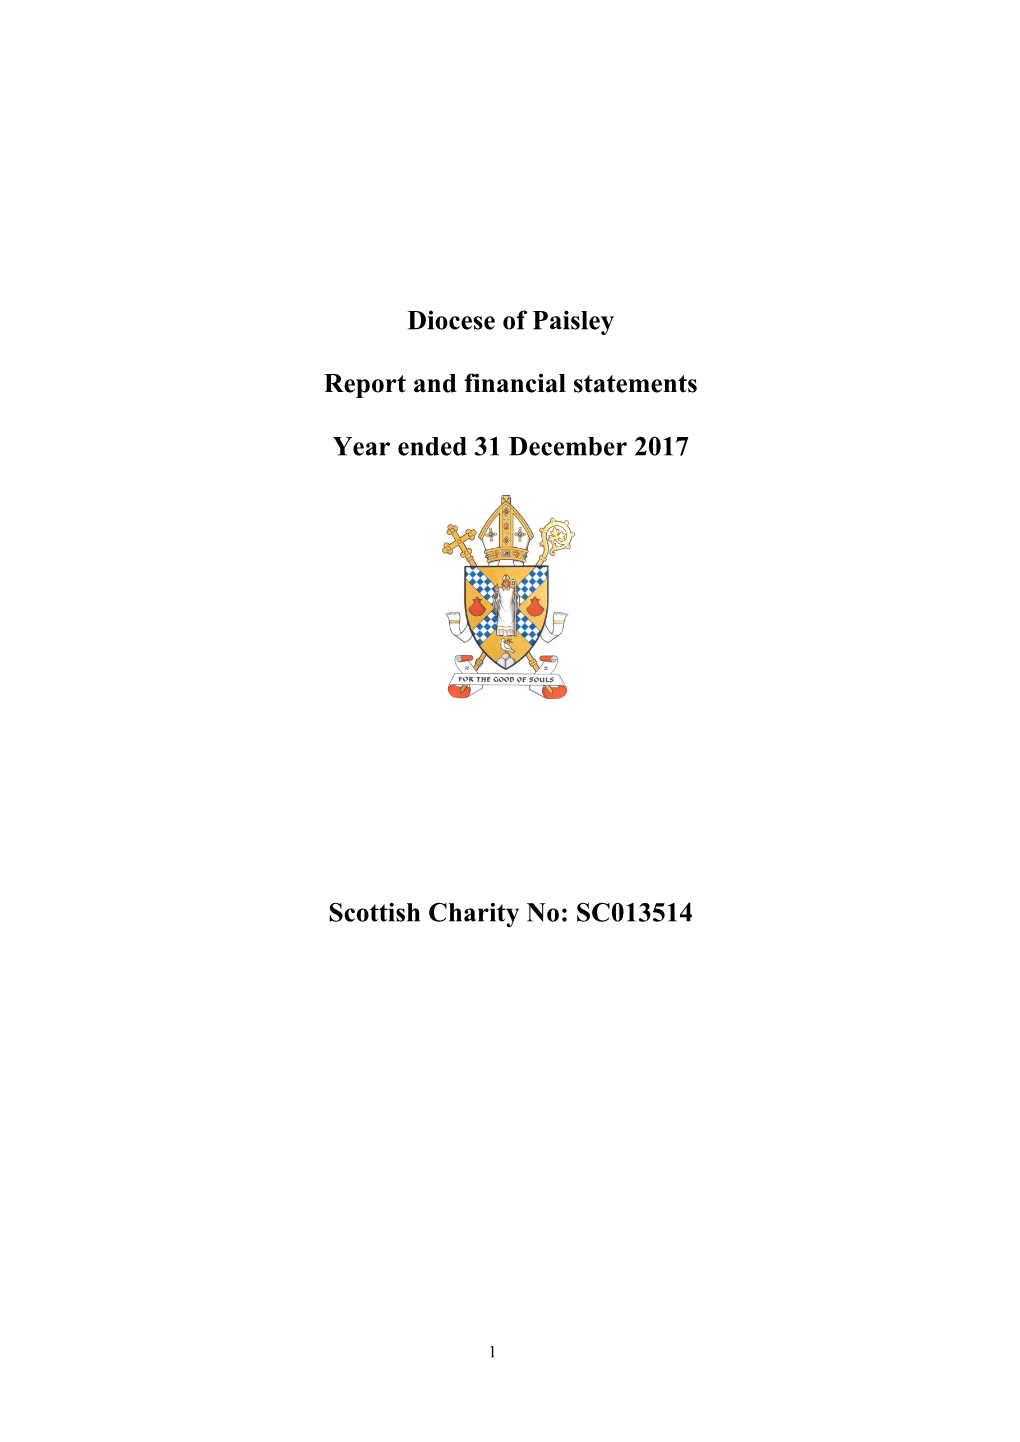 Diocese of Paisley Report and Financial Statements Year Ended 31